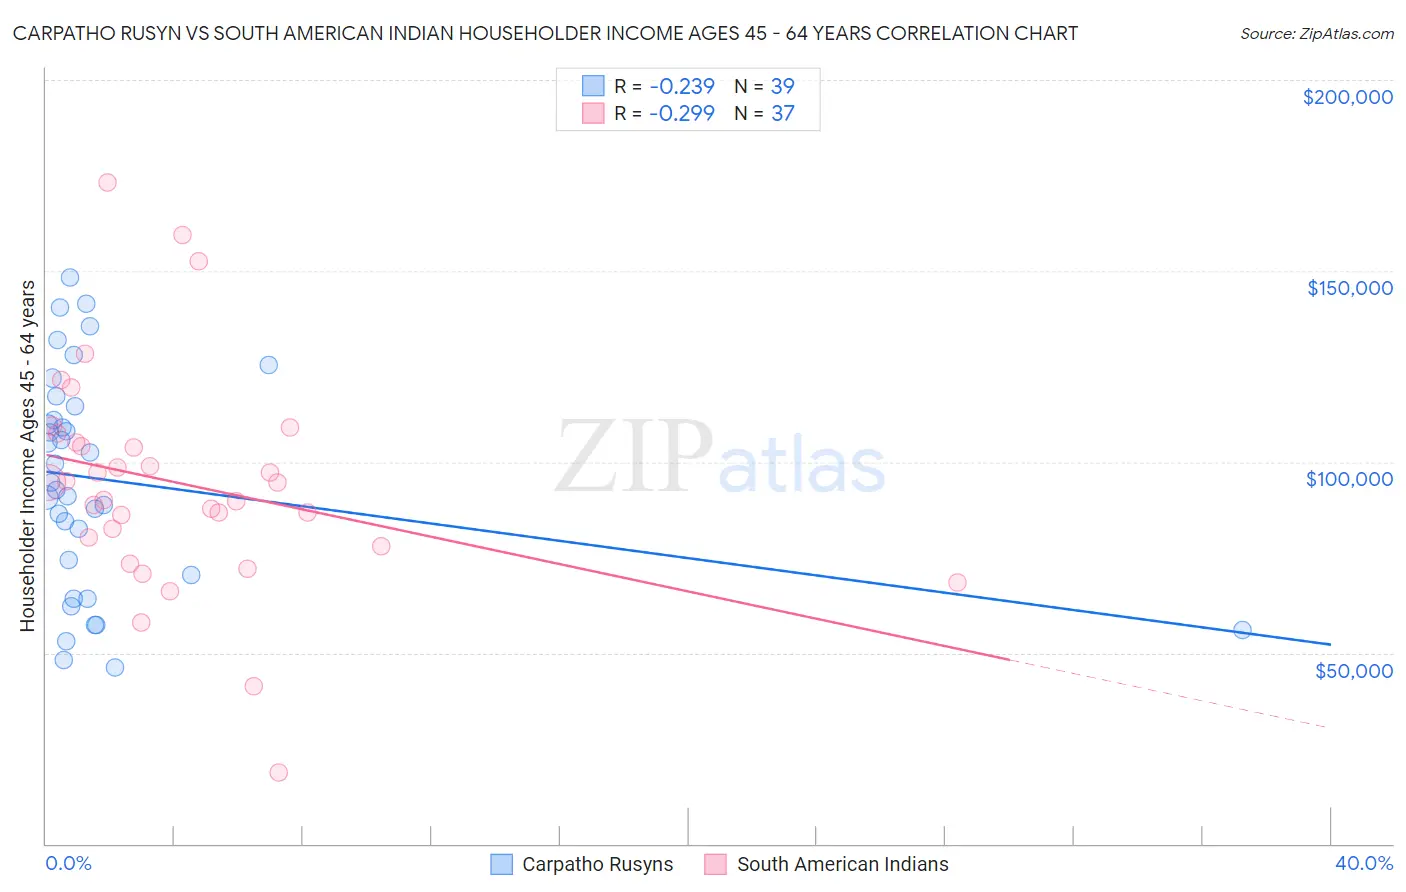 Carpatho Rusyn vs South American Indian Householder Income Ages 45 - 64 years